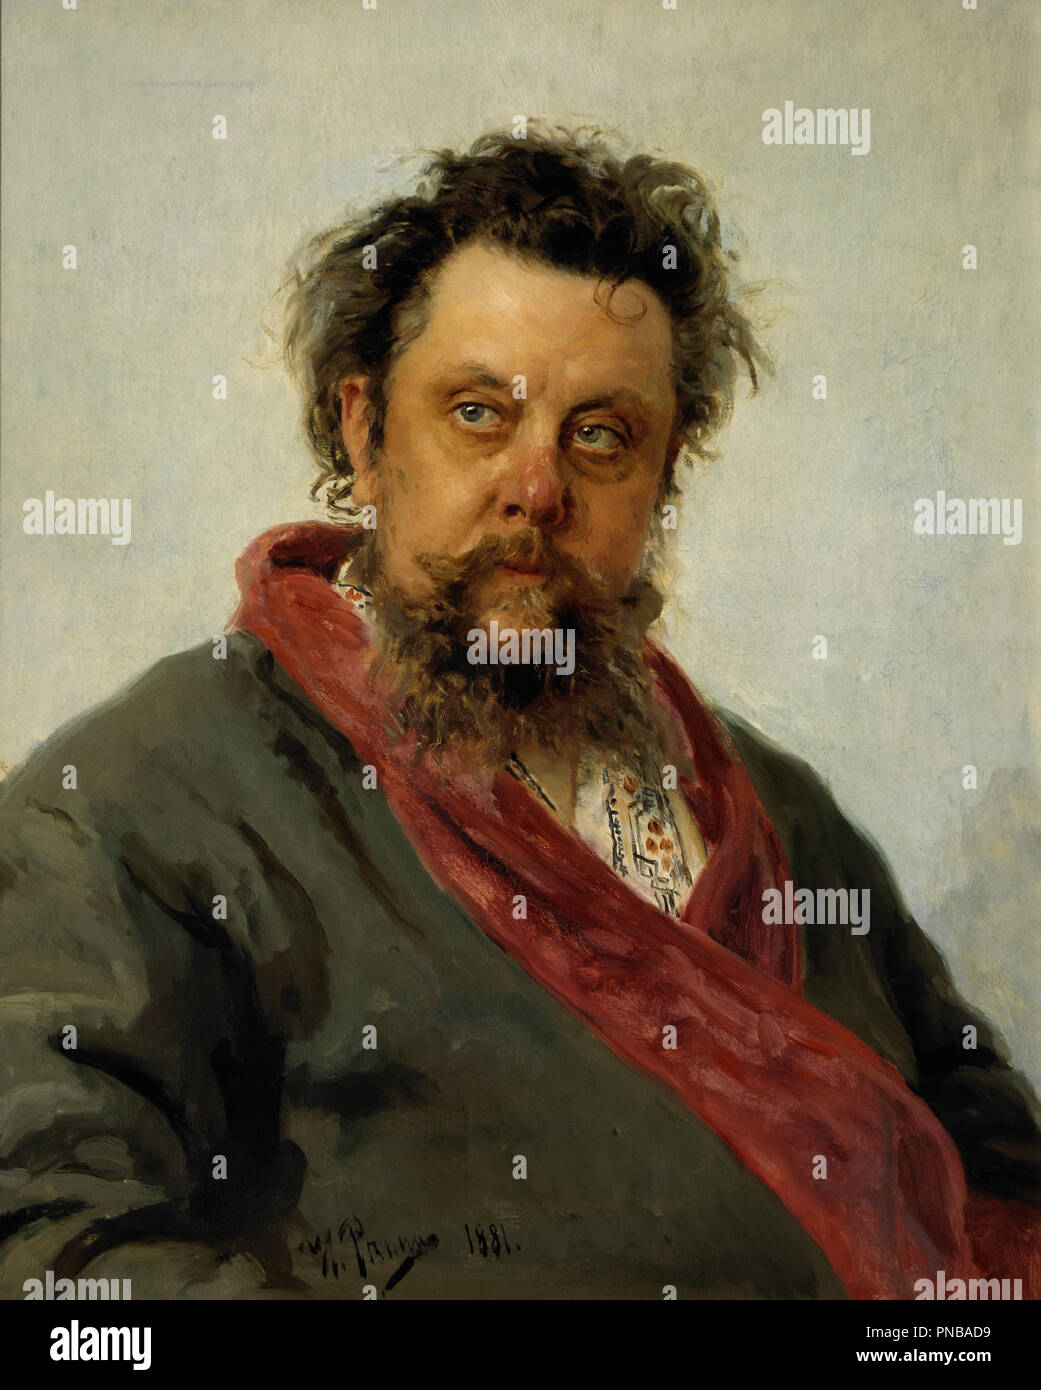 Portrait of M. P. Musorgsky. Date/Period: 1881. Painting. Oil on canvas. Height: 69 cm (27.1 in); Width: 57 cm (22.4 in). Author: Ilya Repin. REPIN, ILYA YEFIMOVICH. Stock Photo